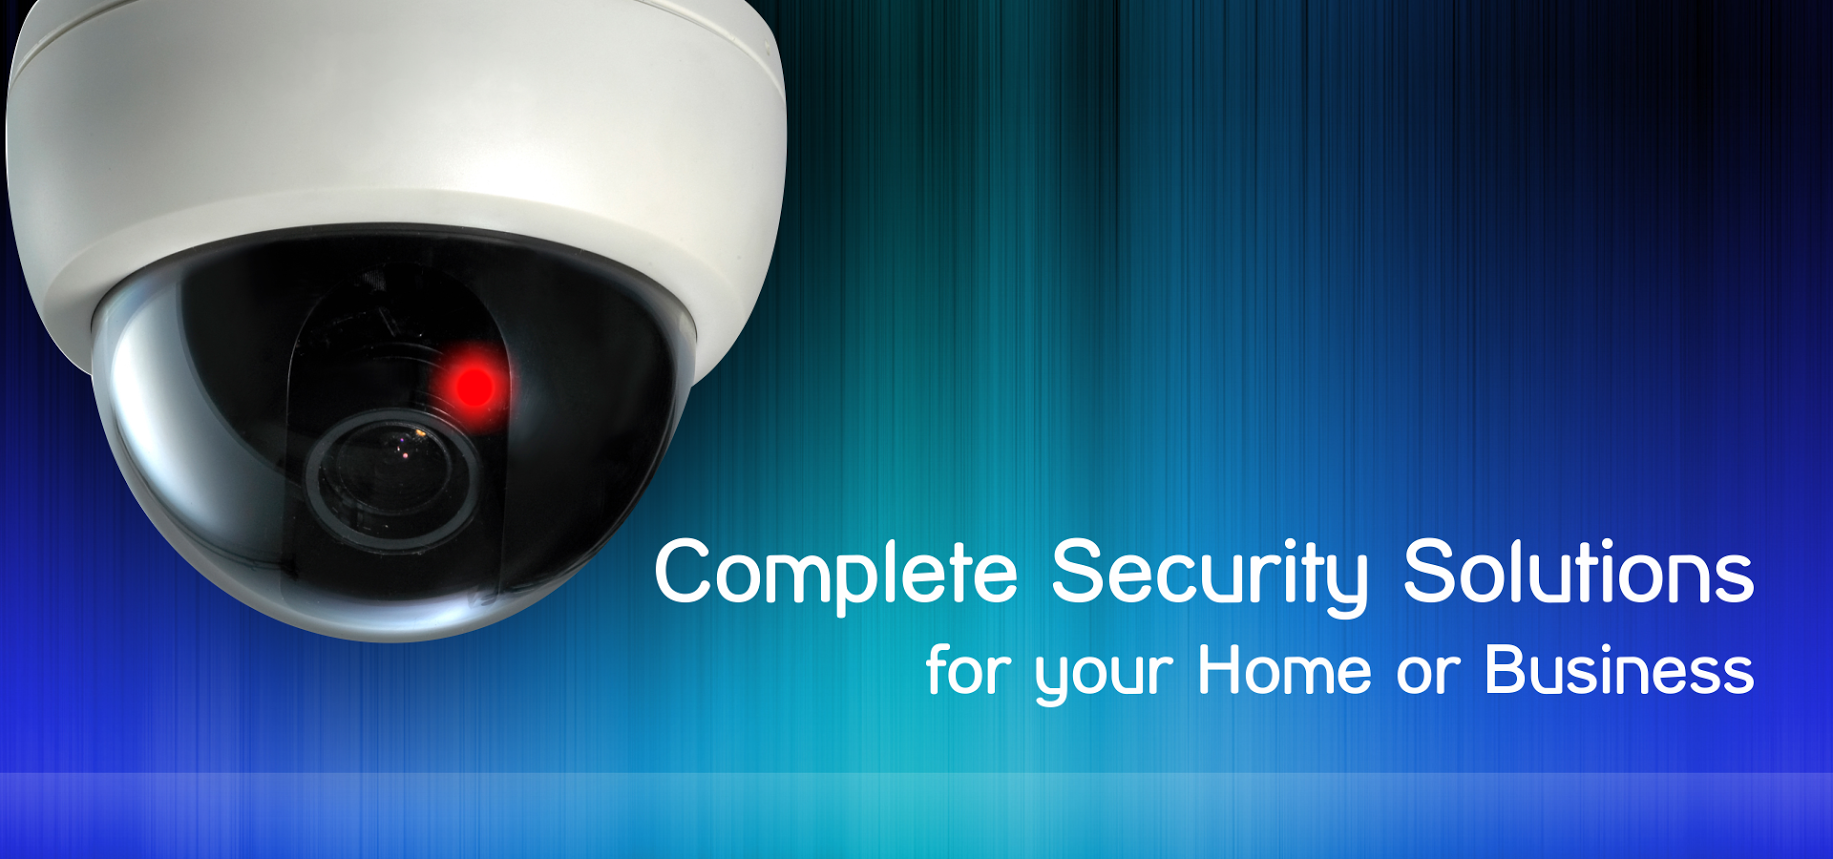 cctv-solutions-dh